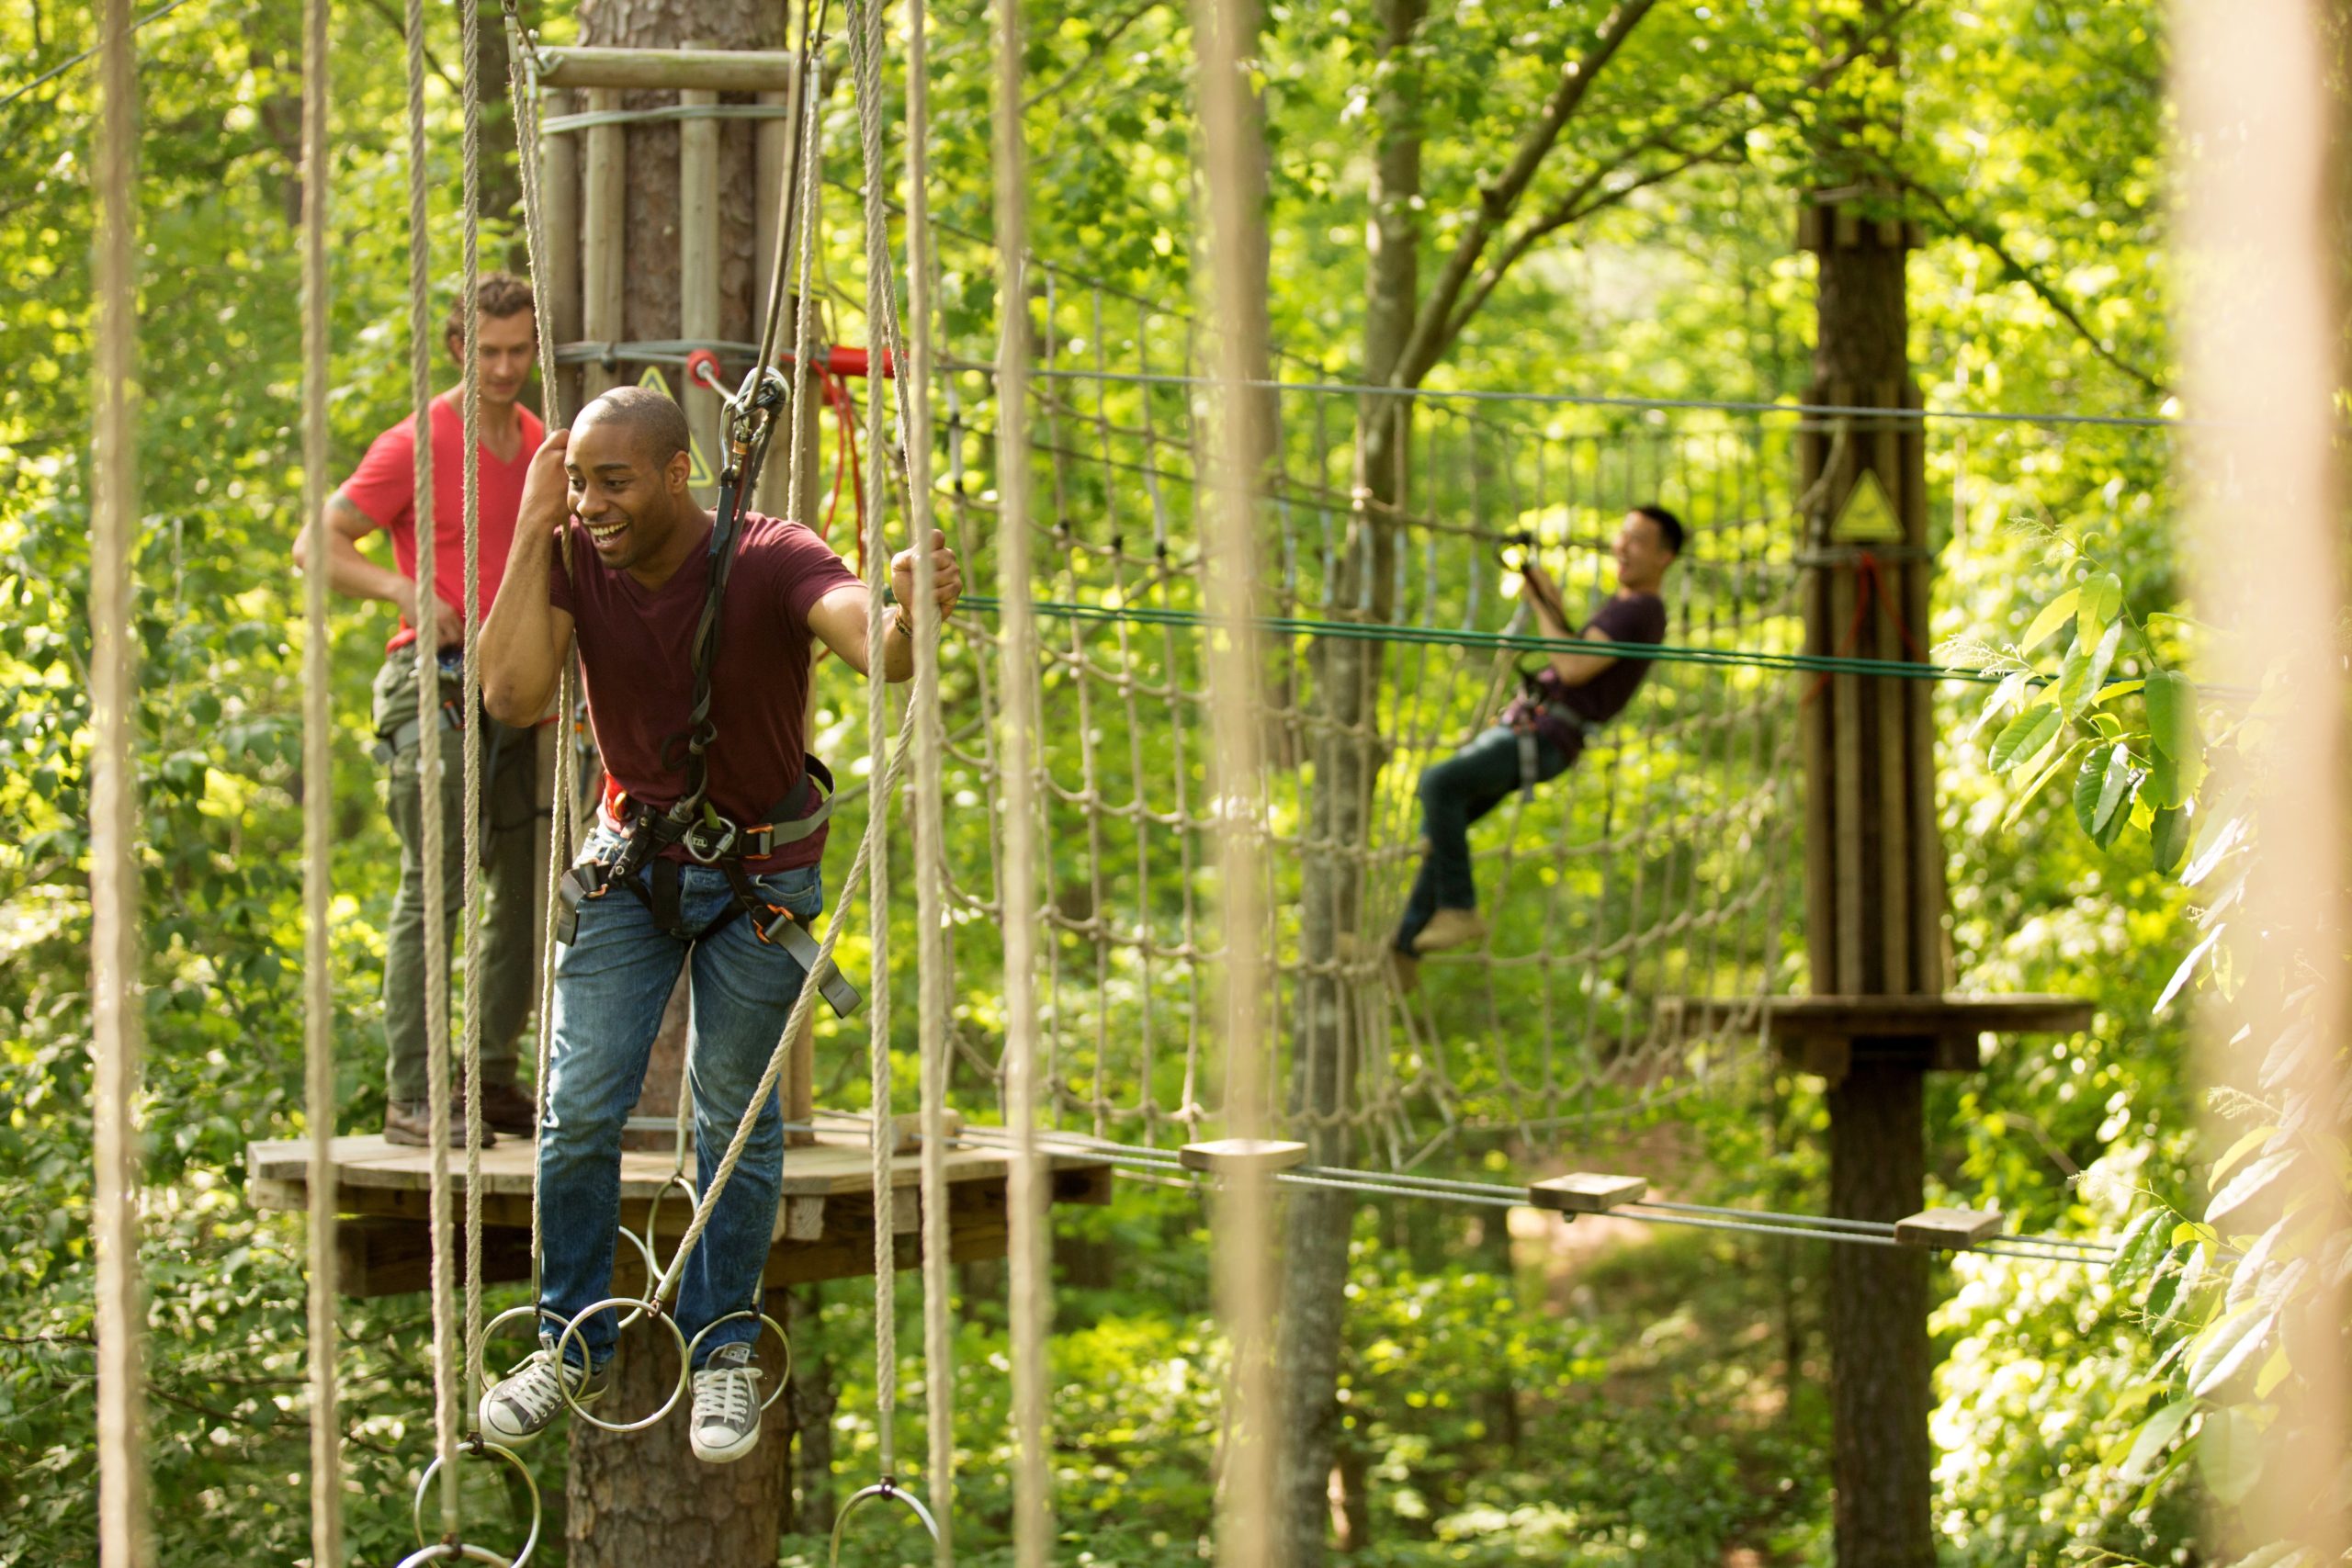 20 Top Things to Do in Plano - Treetop Adventure Course